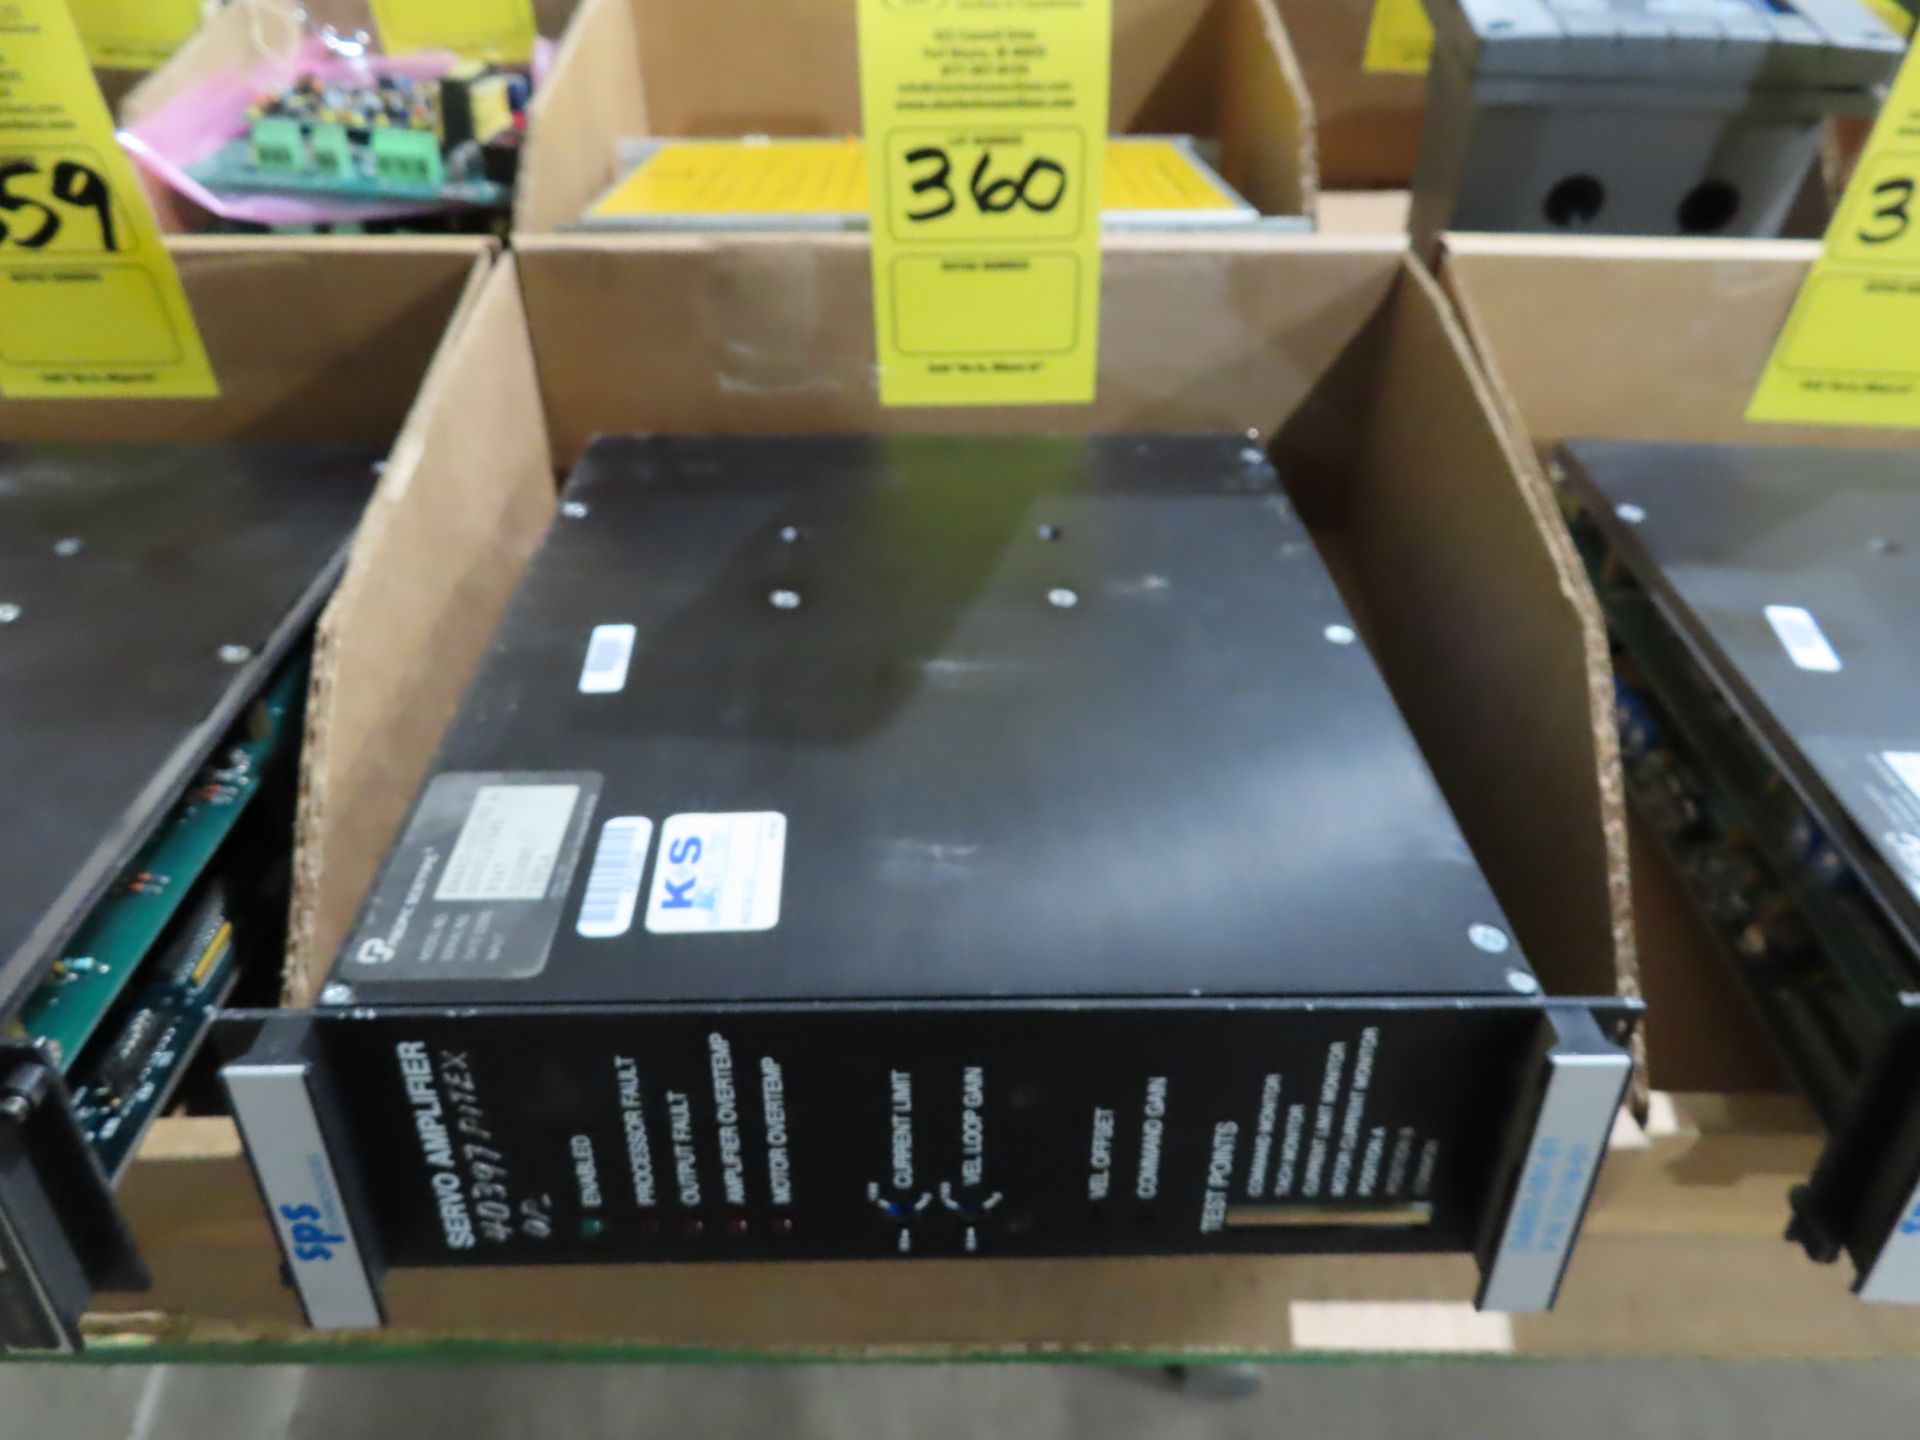 Pacific Scientific model SA602-001-01 servo amplifier, as always, with Brolyn LLC auctions, all lots